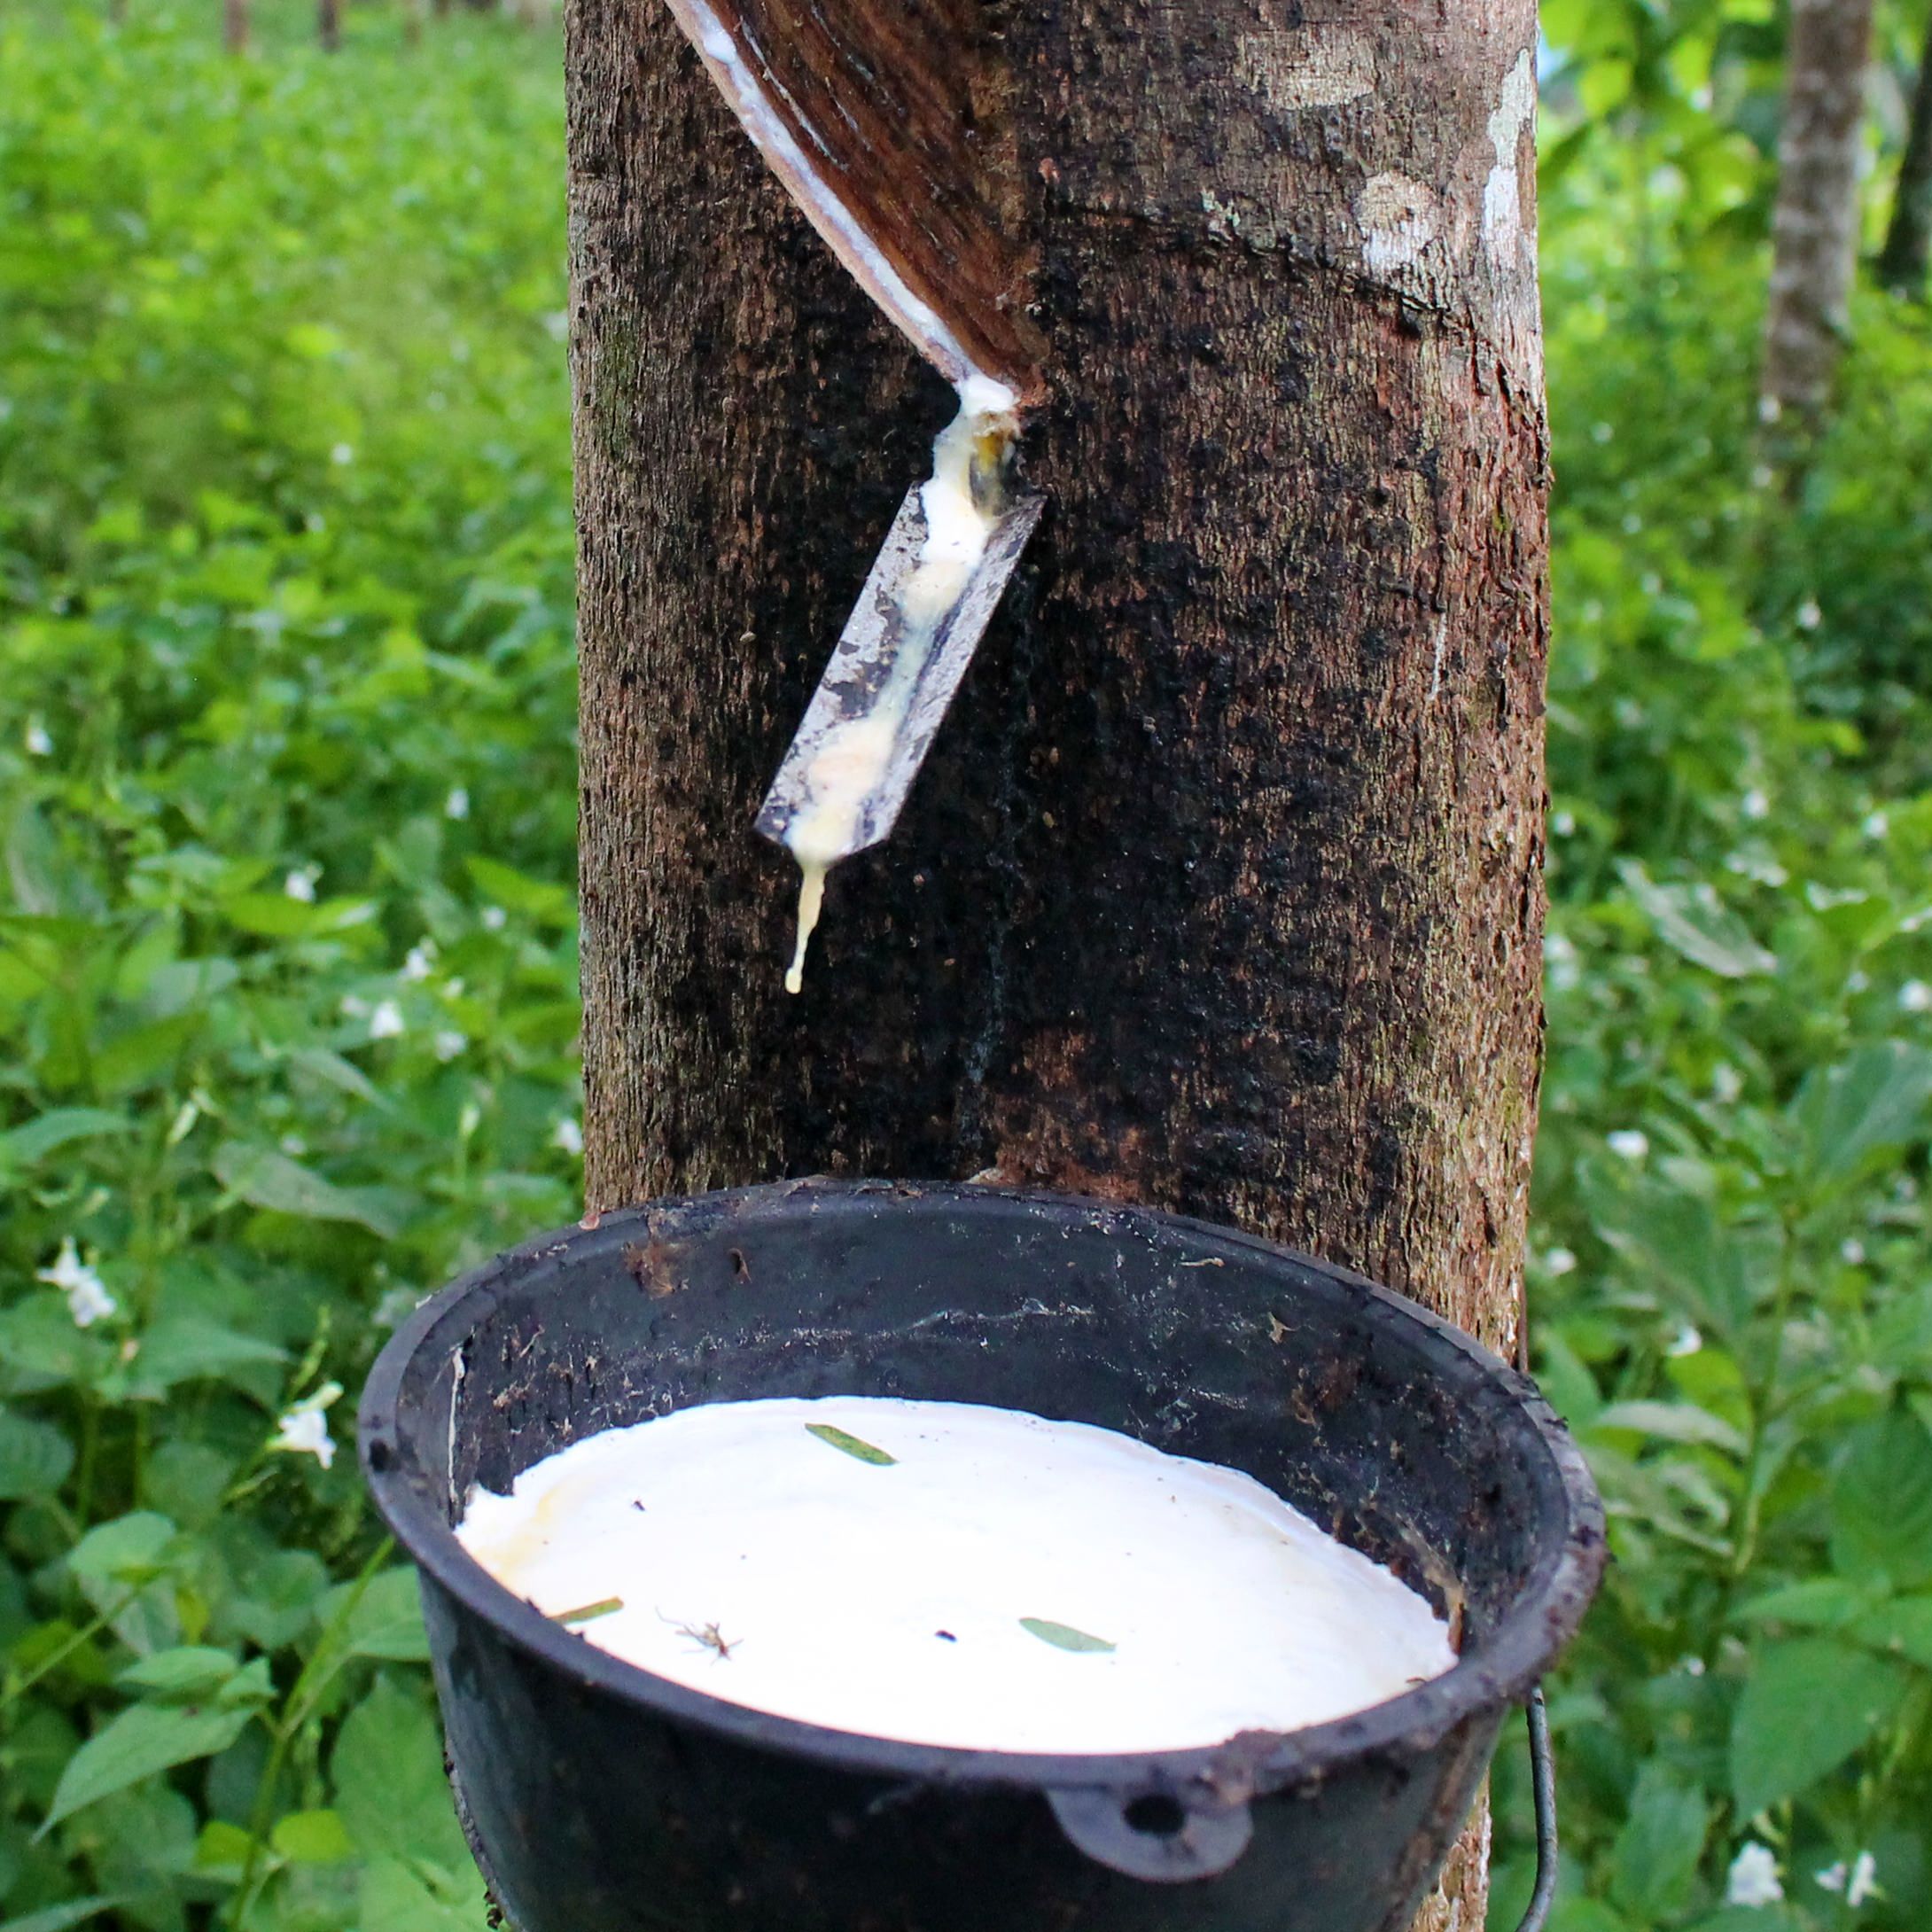 Where Does Rubber Come From?